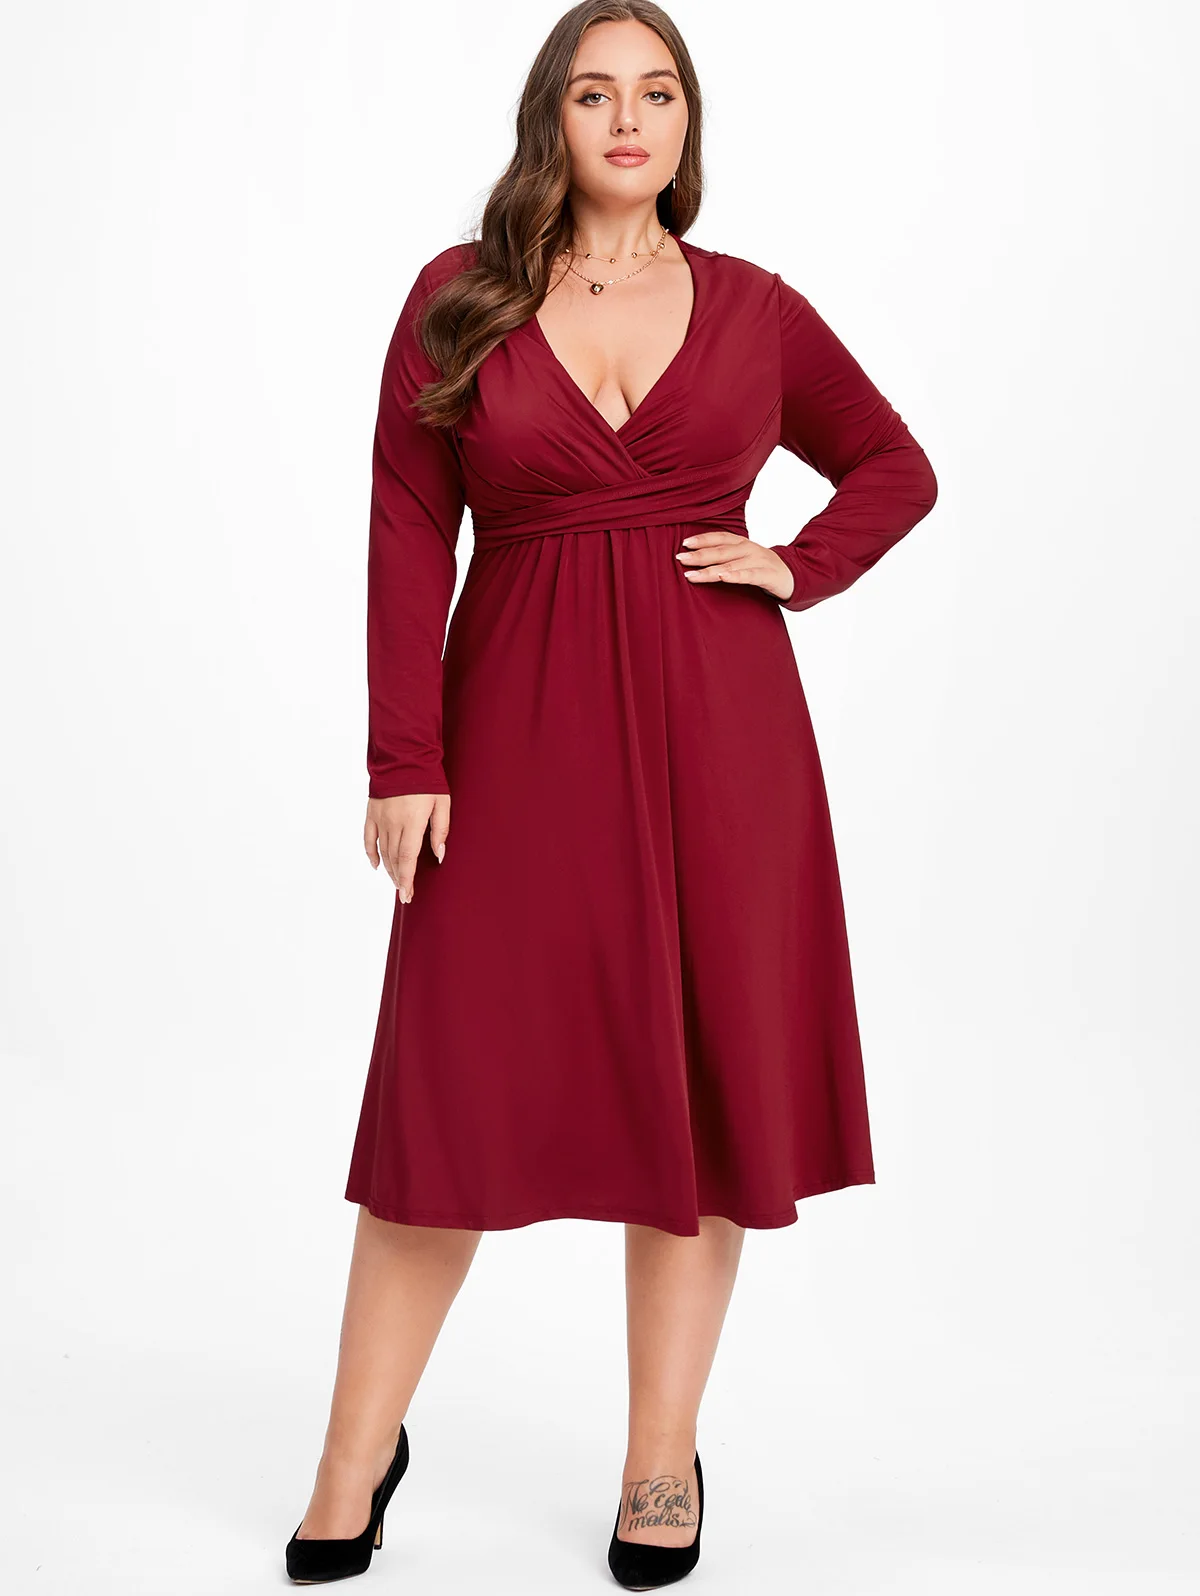 

ROSEGAL Red Elegant Crisscross Surplice Midi Dress Vestidos Women Sexy V Neck Long Sleeve Ruched Fit And Flare Dresses 5XL